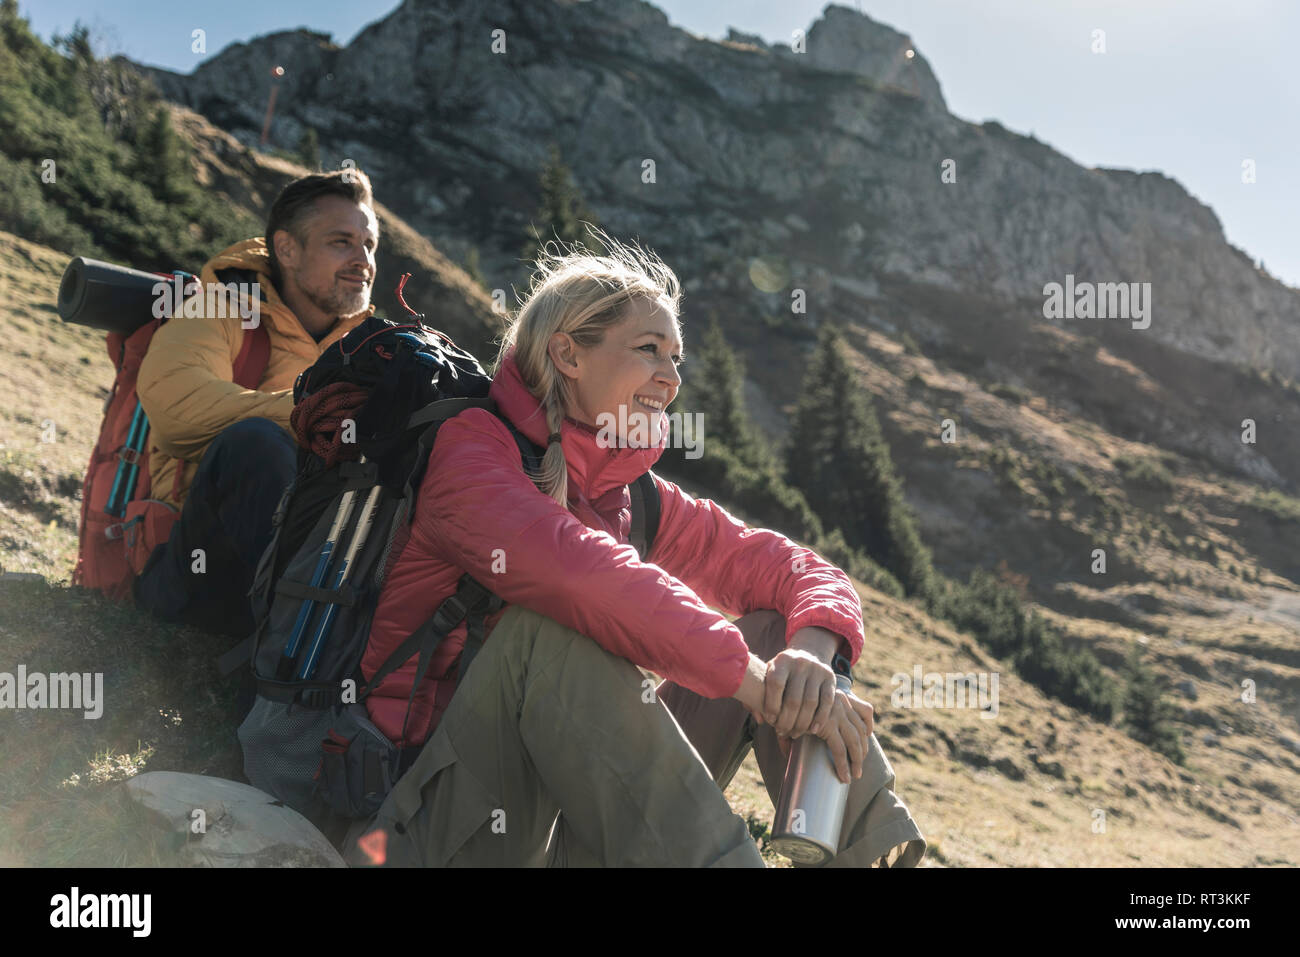 Austria, Tyrol, couple having a break during a hiking trip in the mountains Stock Photo